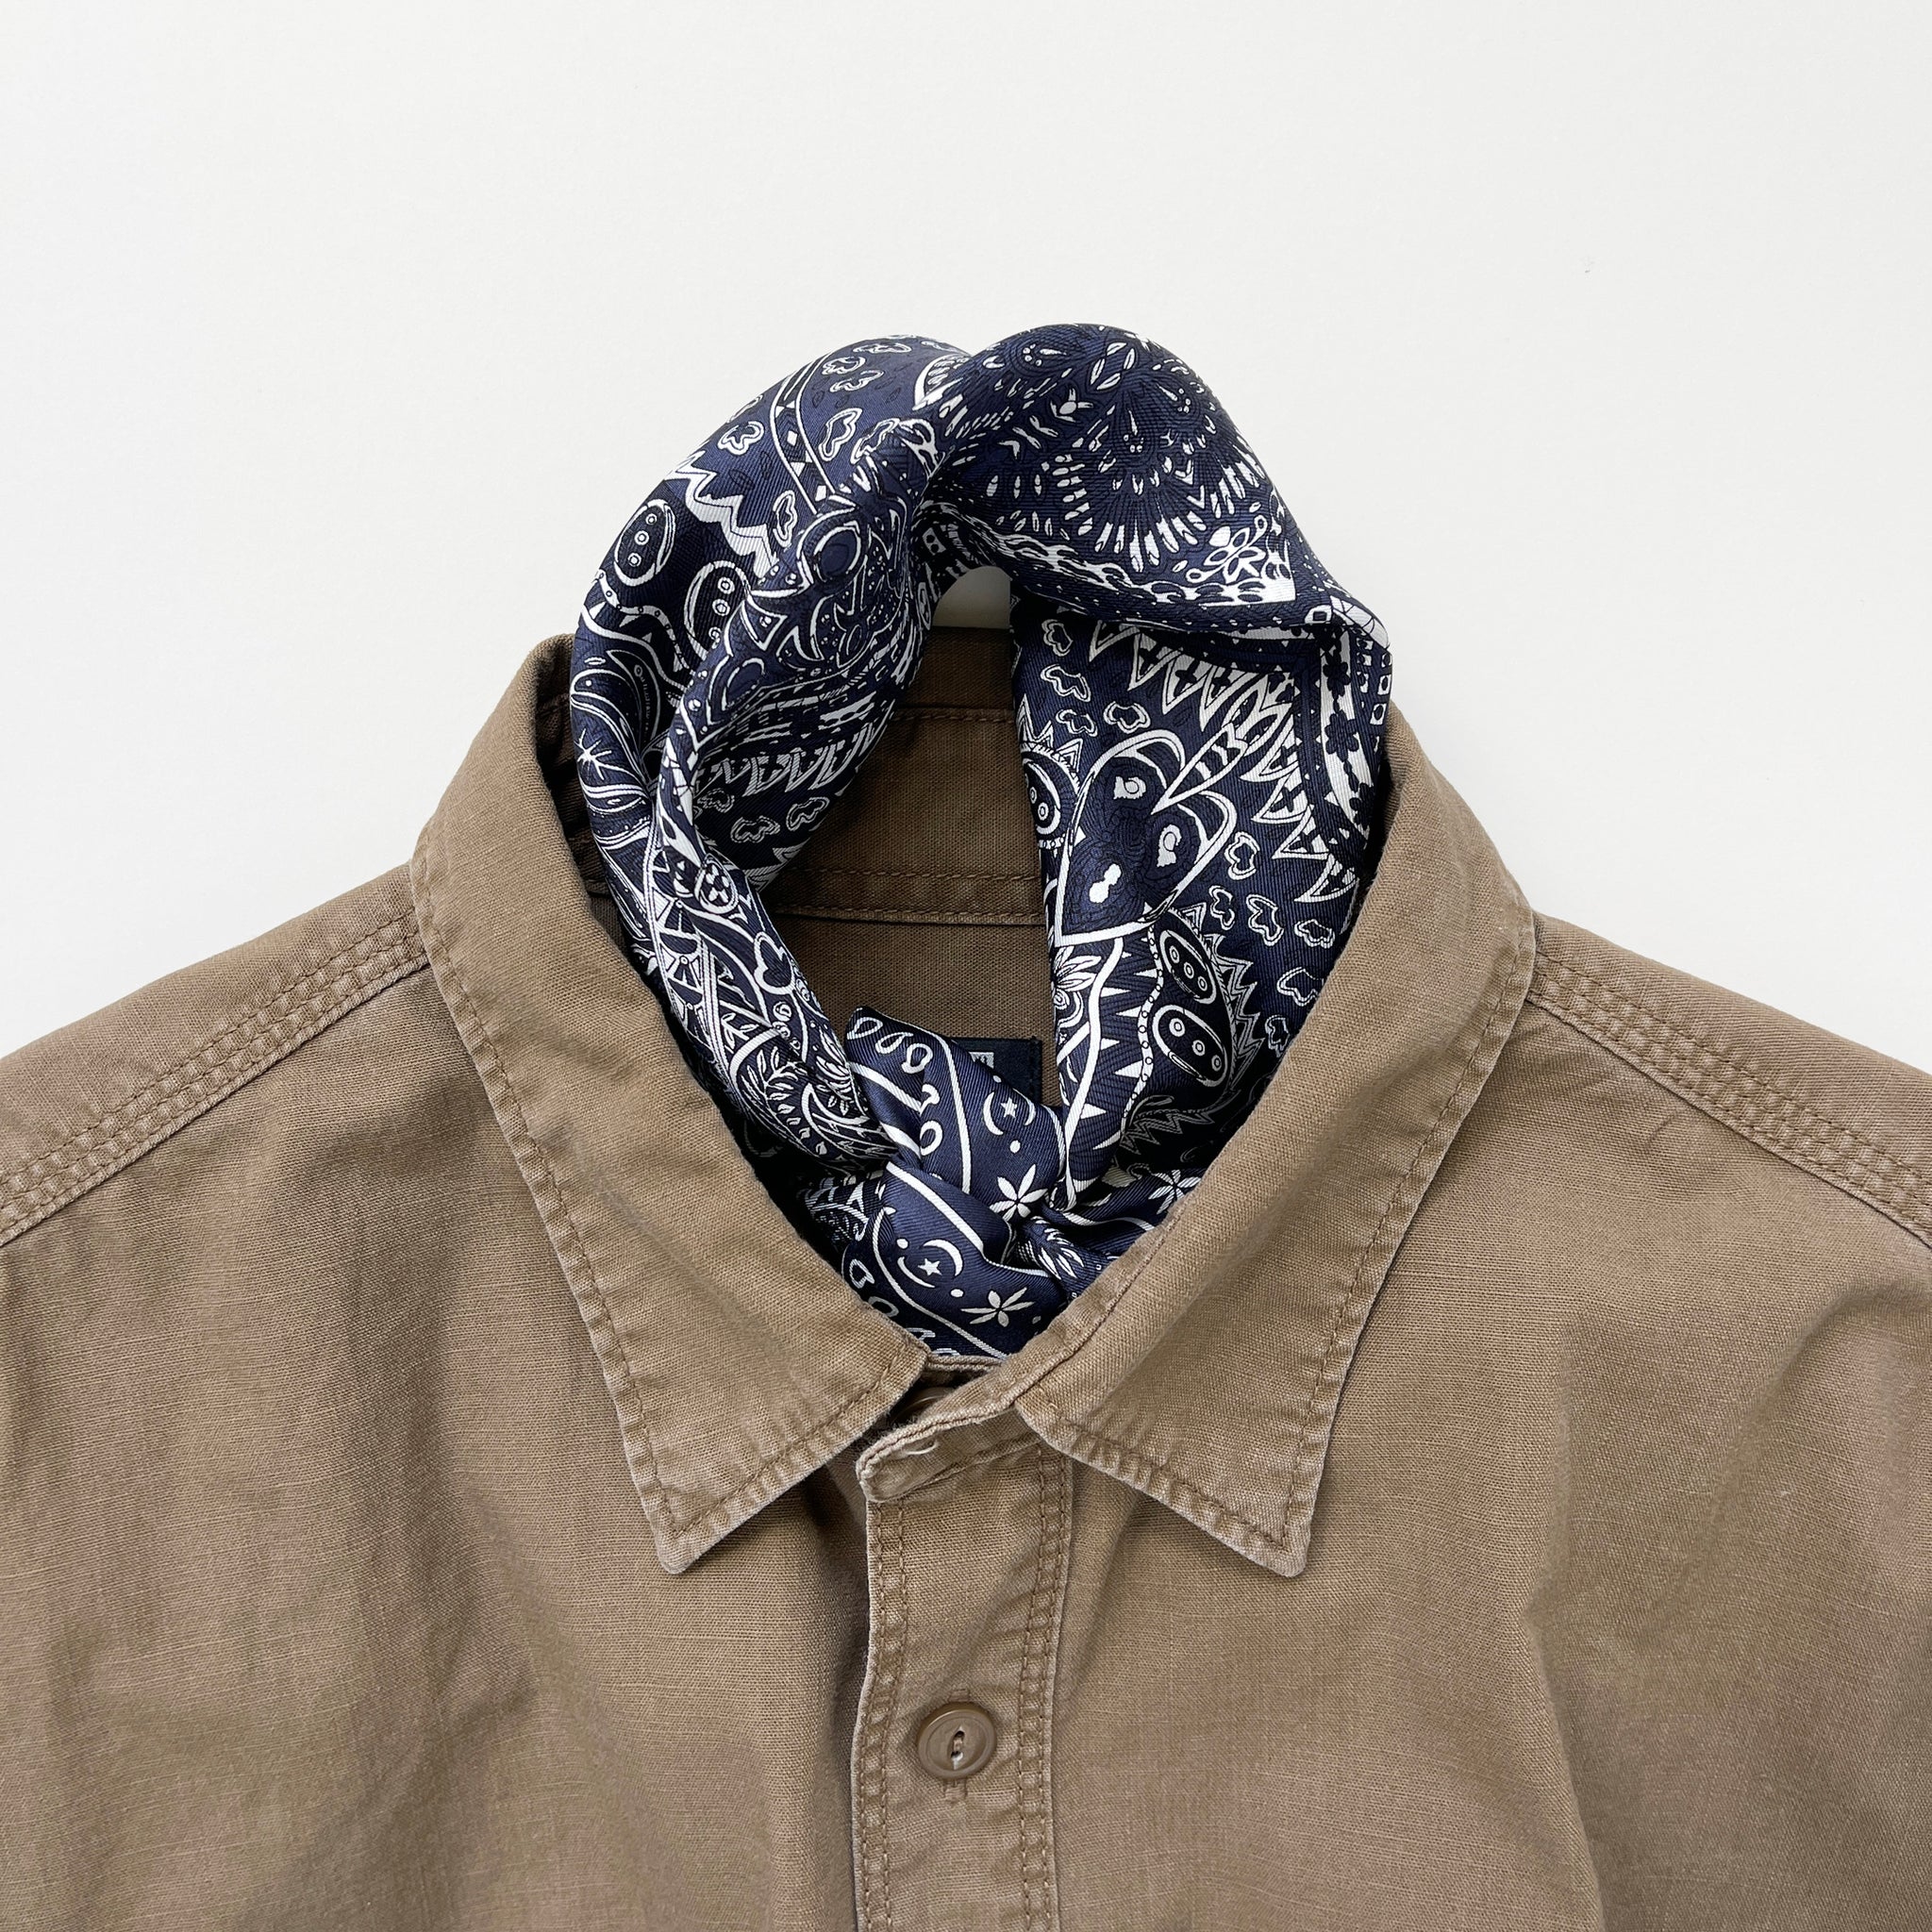 a navy blue mens neckerchief silk scarf featuring white and black symmetric pattern with striped hand-rolled edges, knotted as a neckerchief, paired with a khaki men's shirt